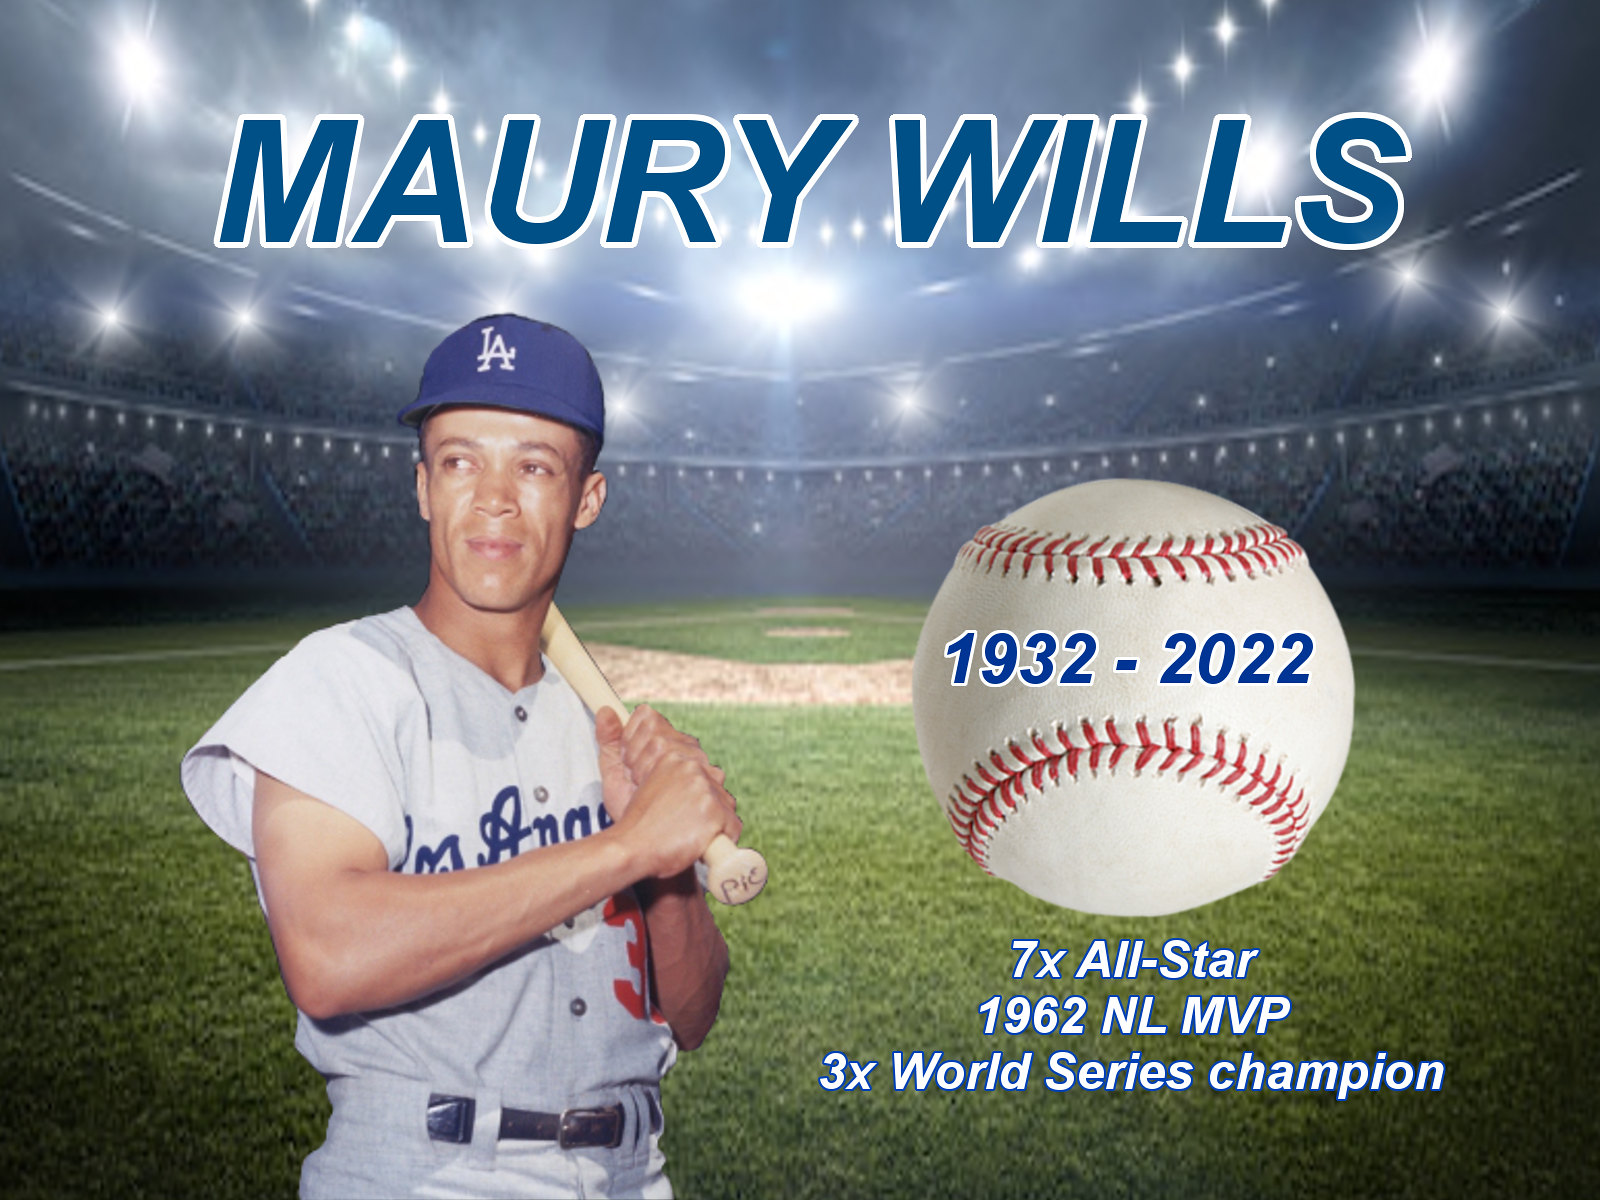 Maury Wills Signed 8 X 10 Photo for Sale in Clinton Township, MI - OfferUp